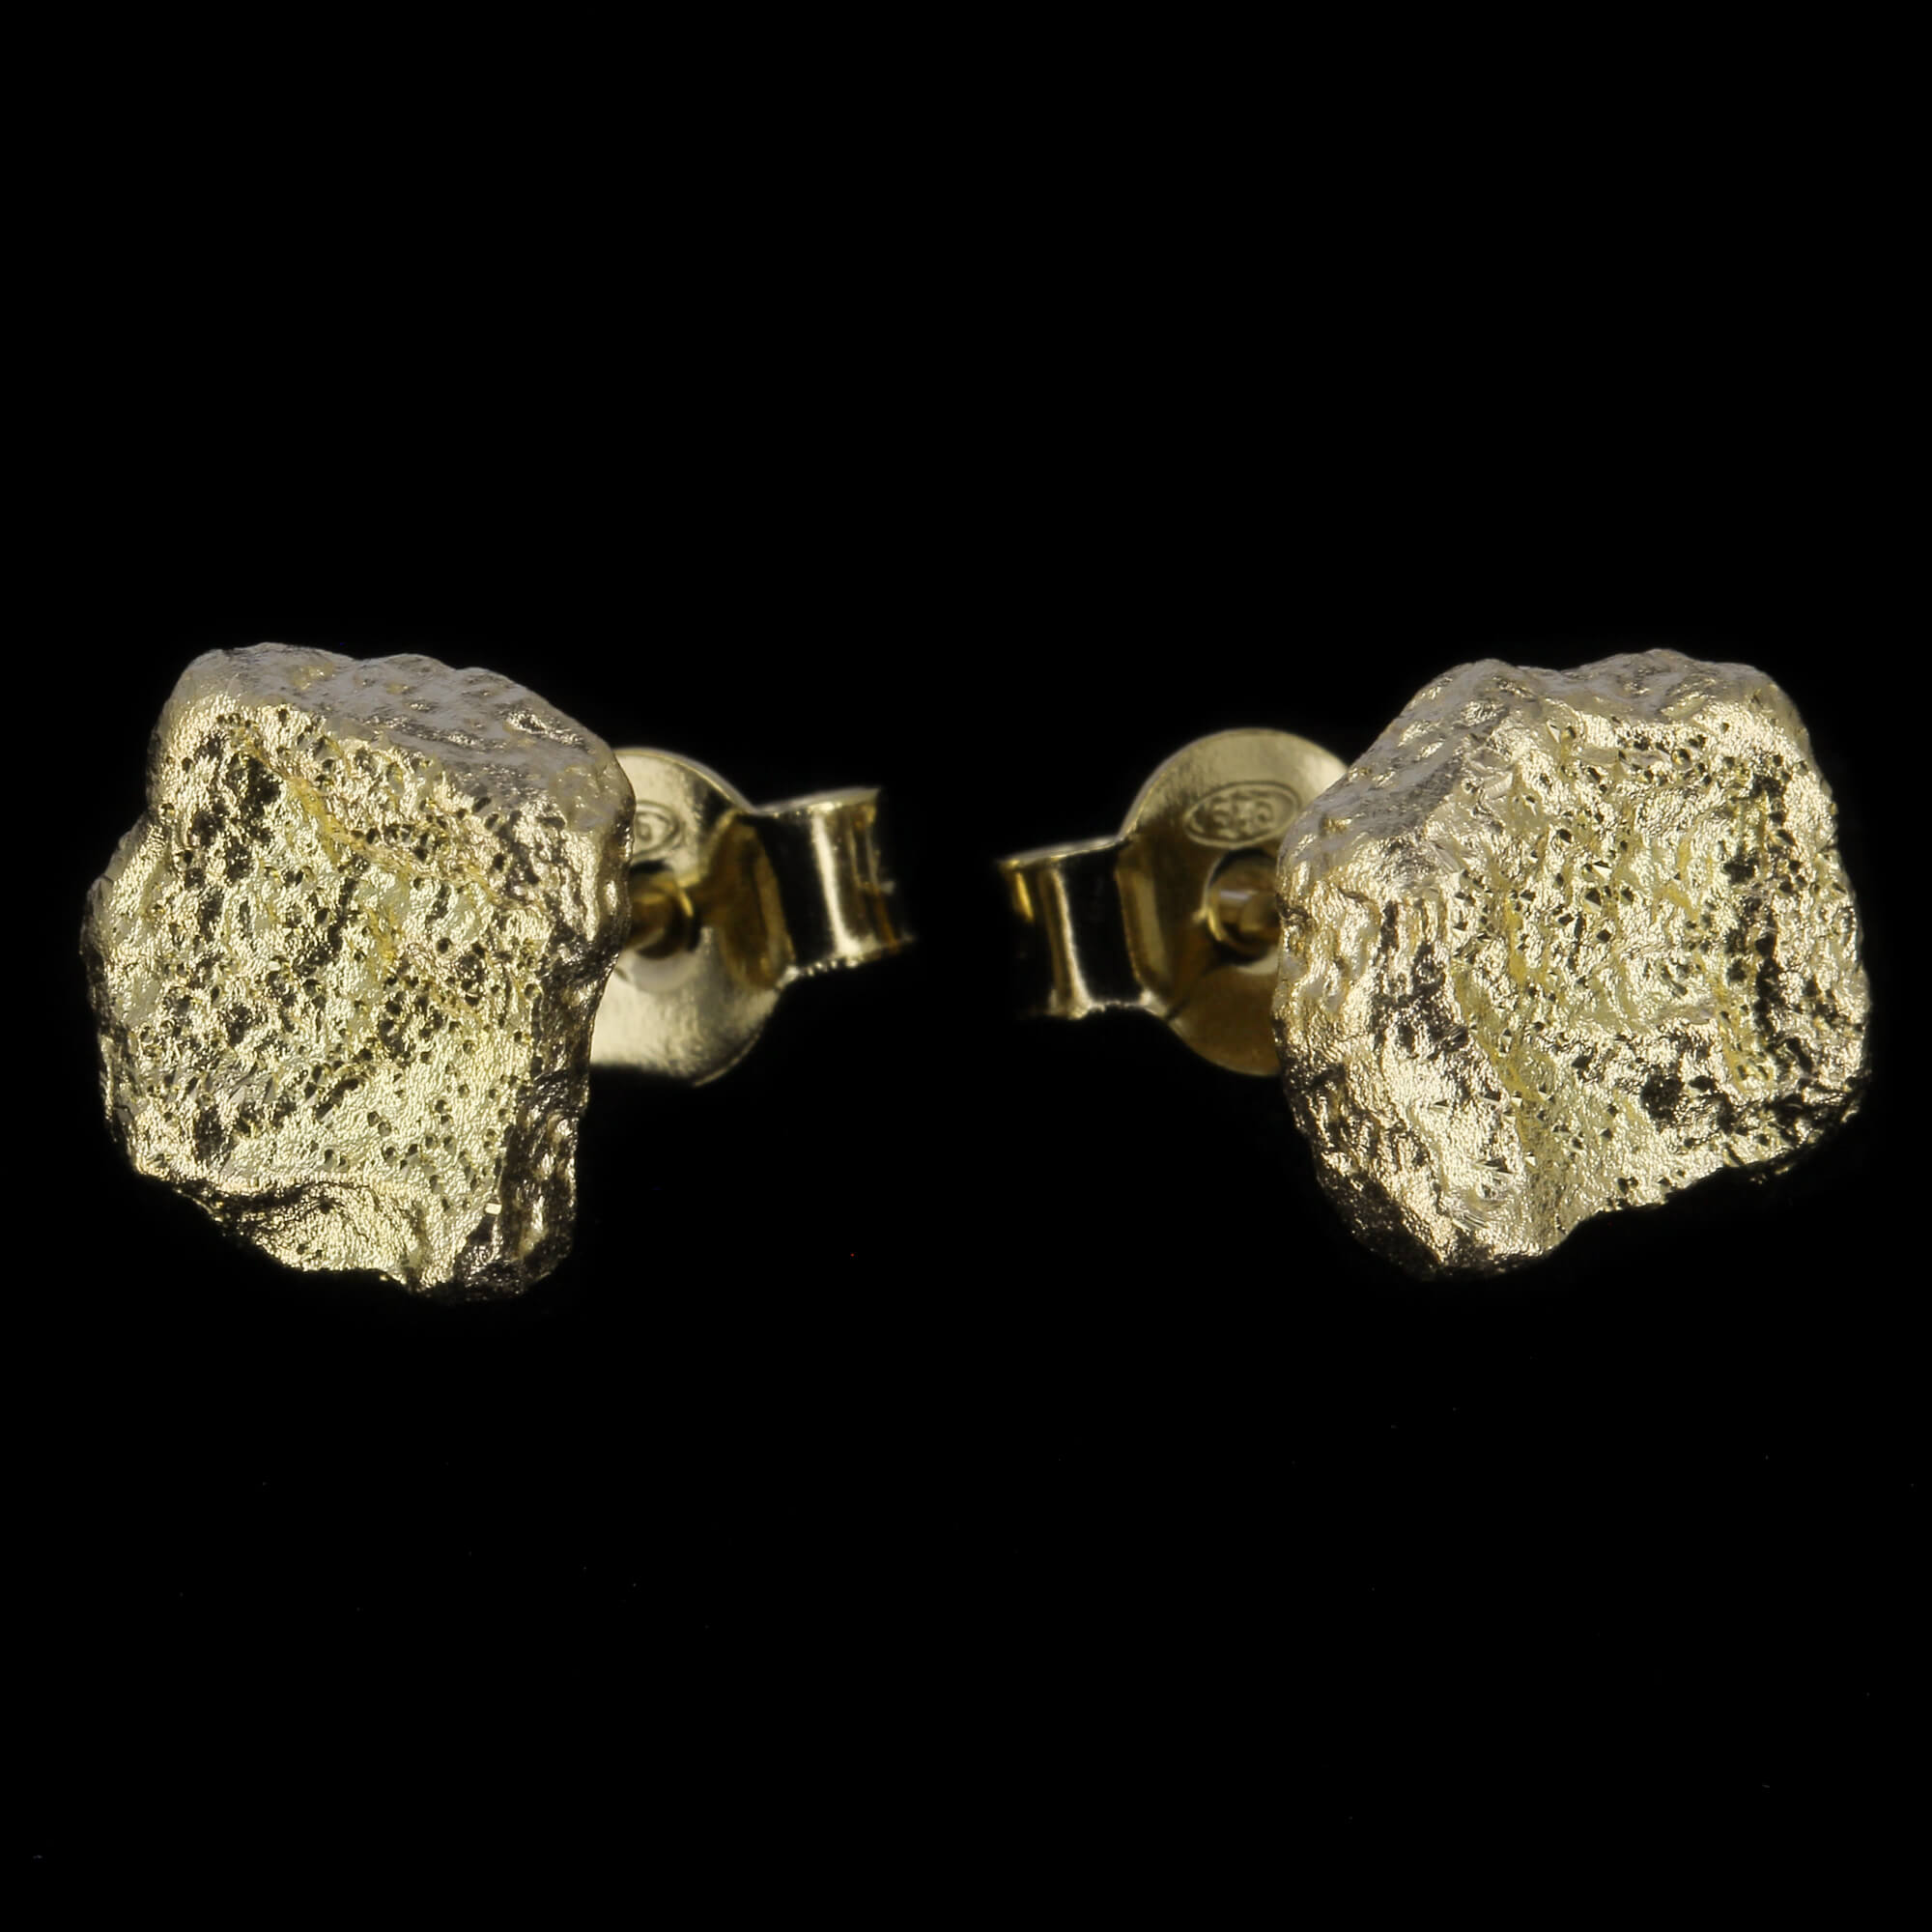 Small gold-plated stone-shaped earrings